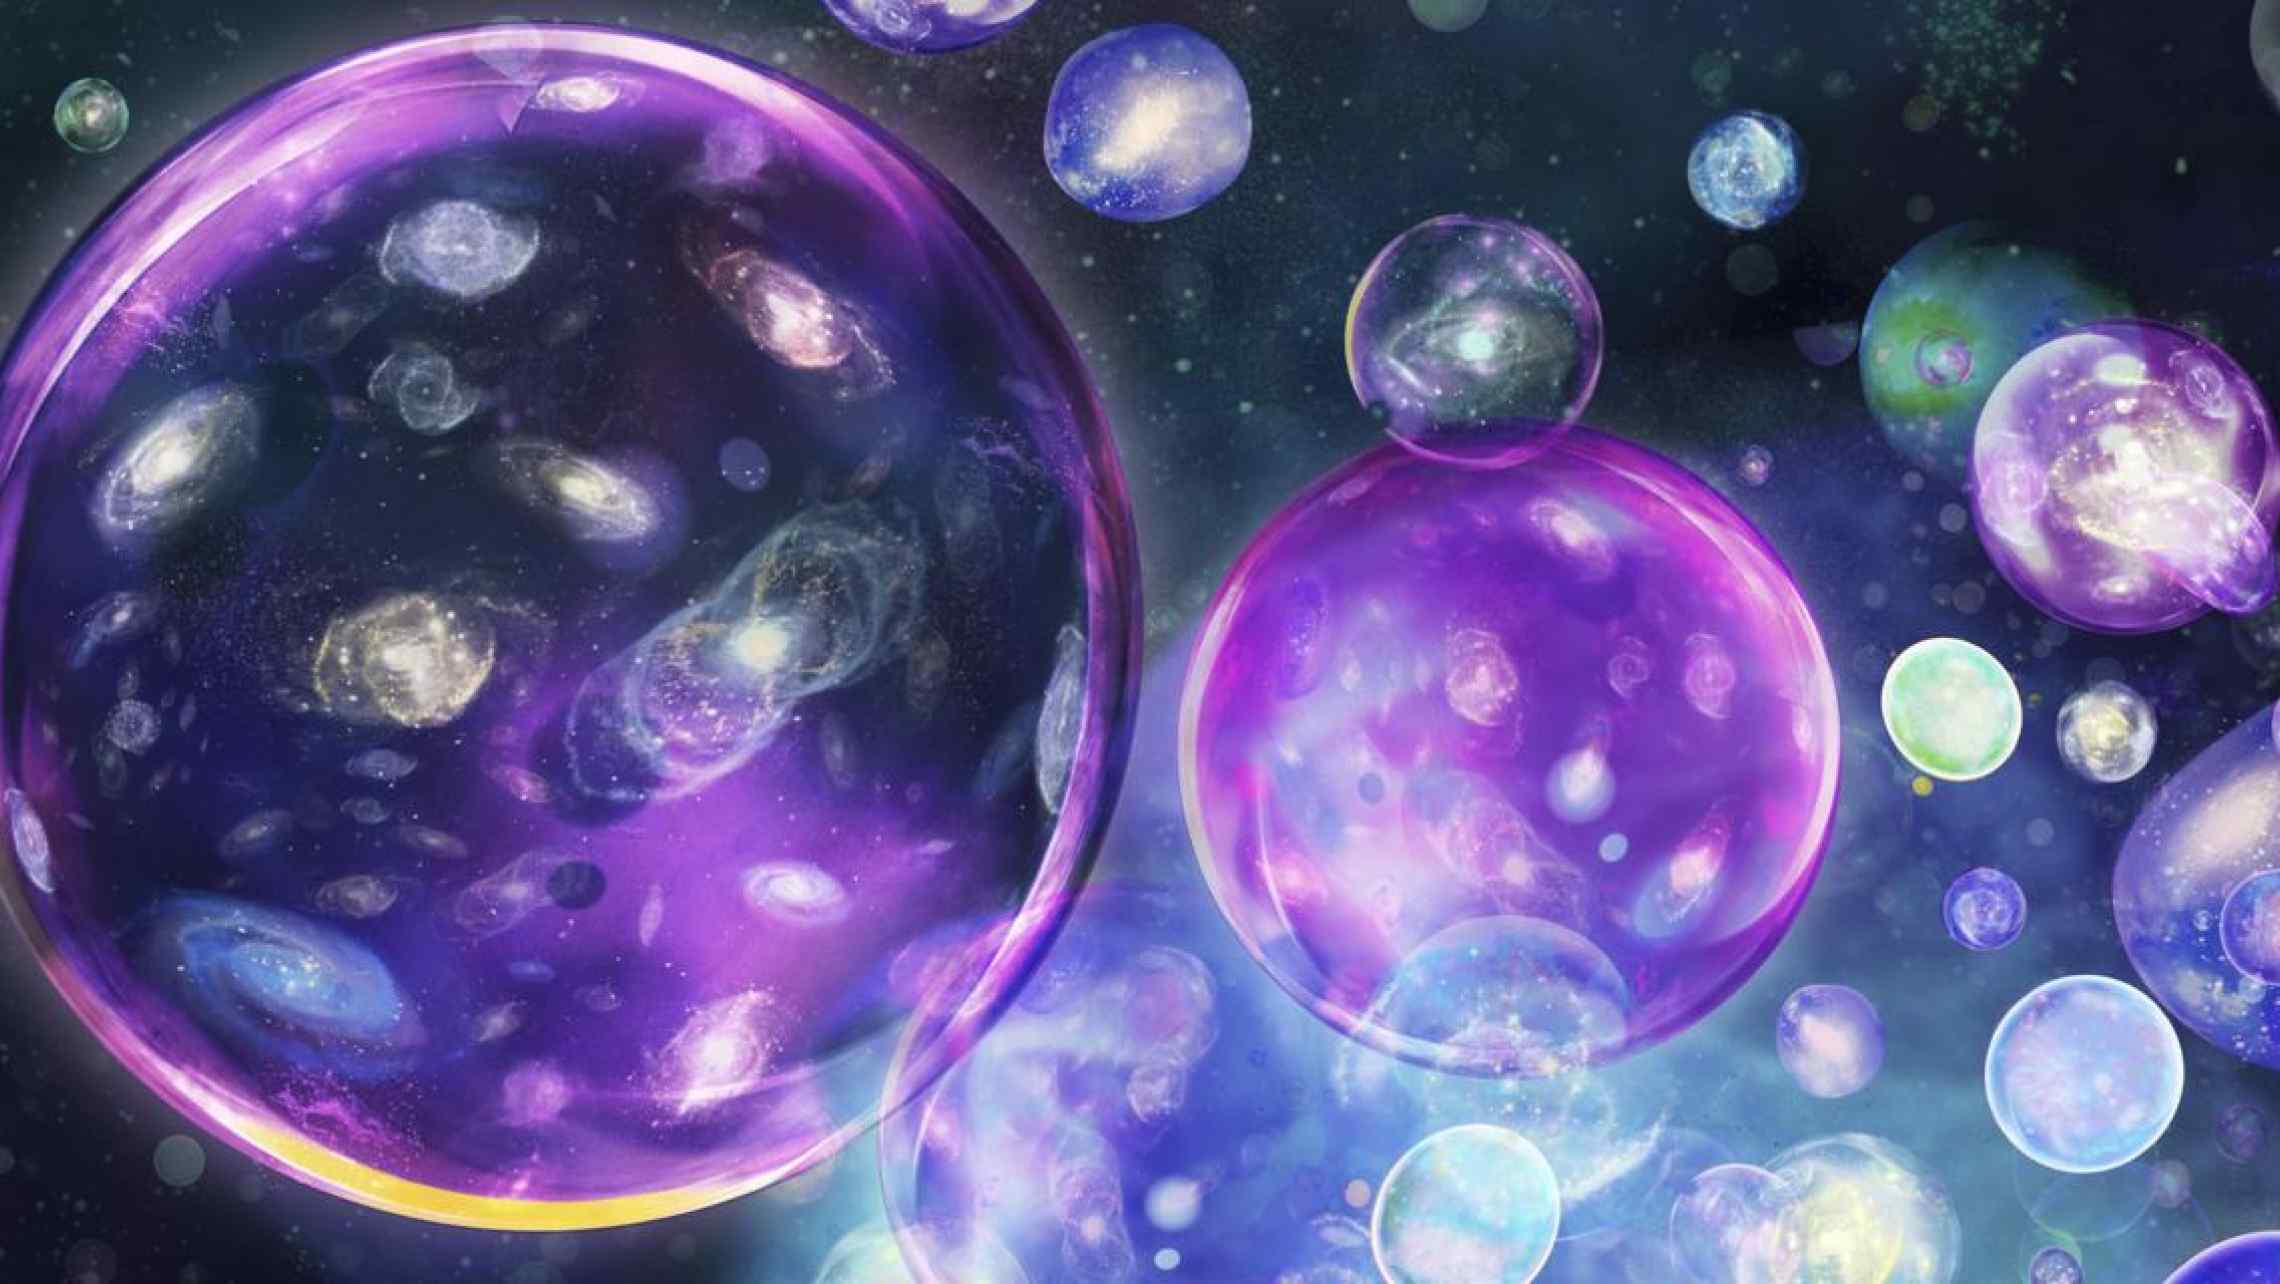 THE FIRST EVER EVIDENCE OF THE MULTIVERSE